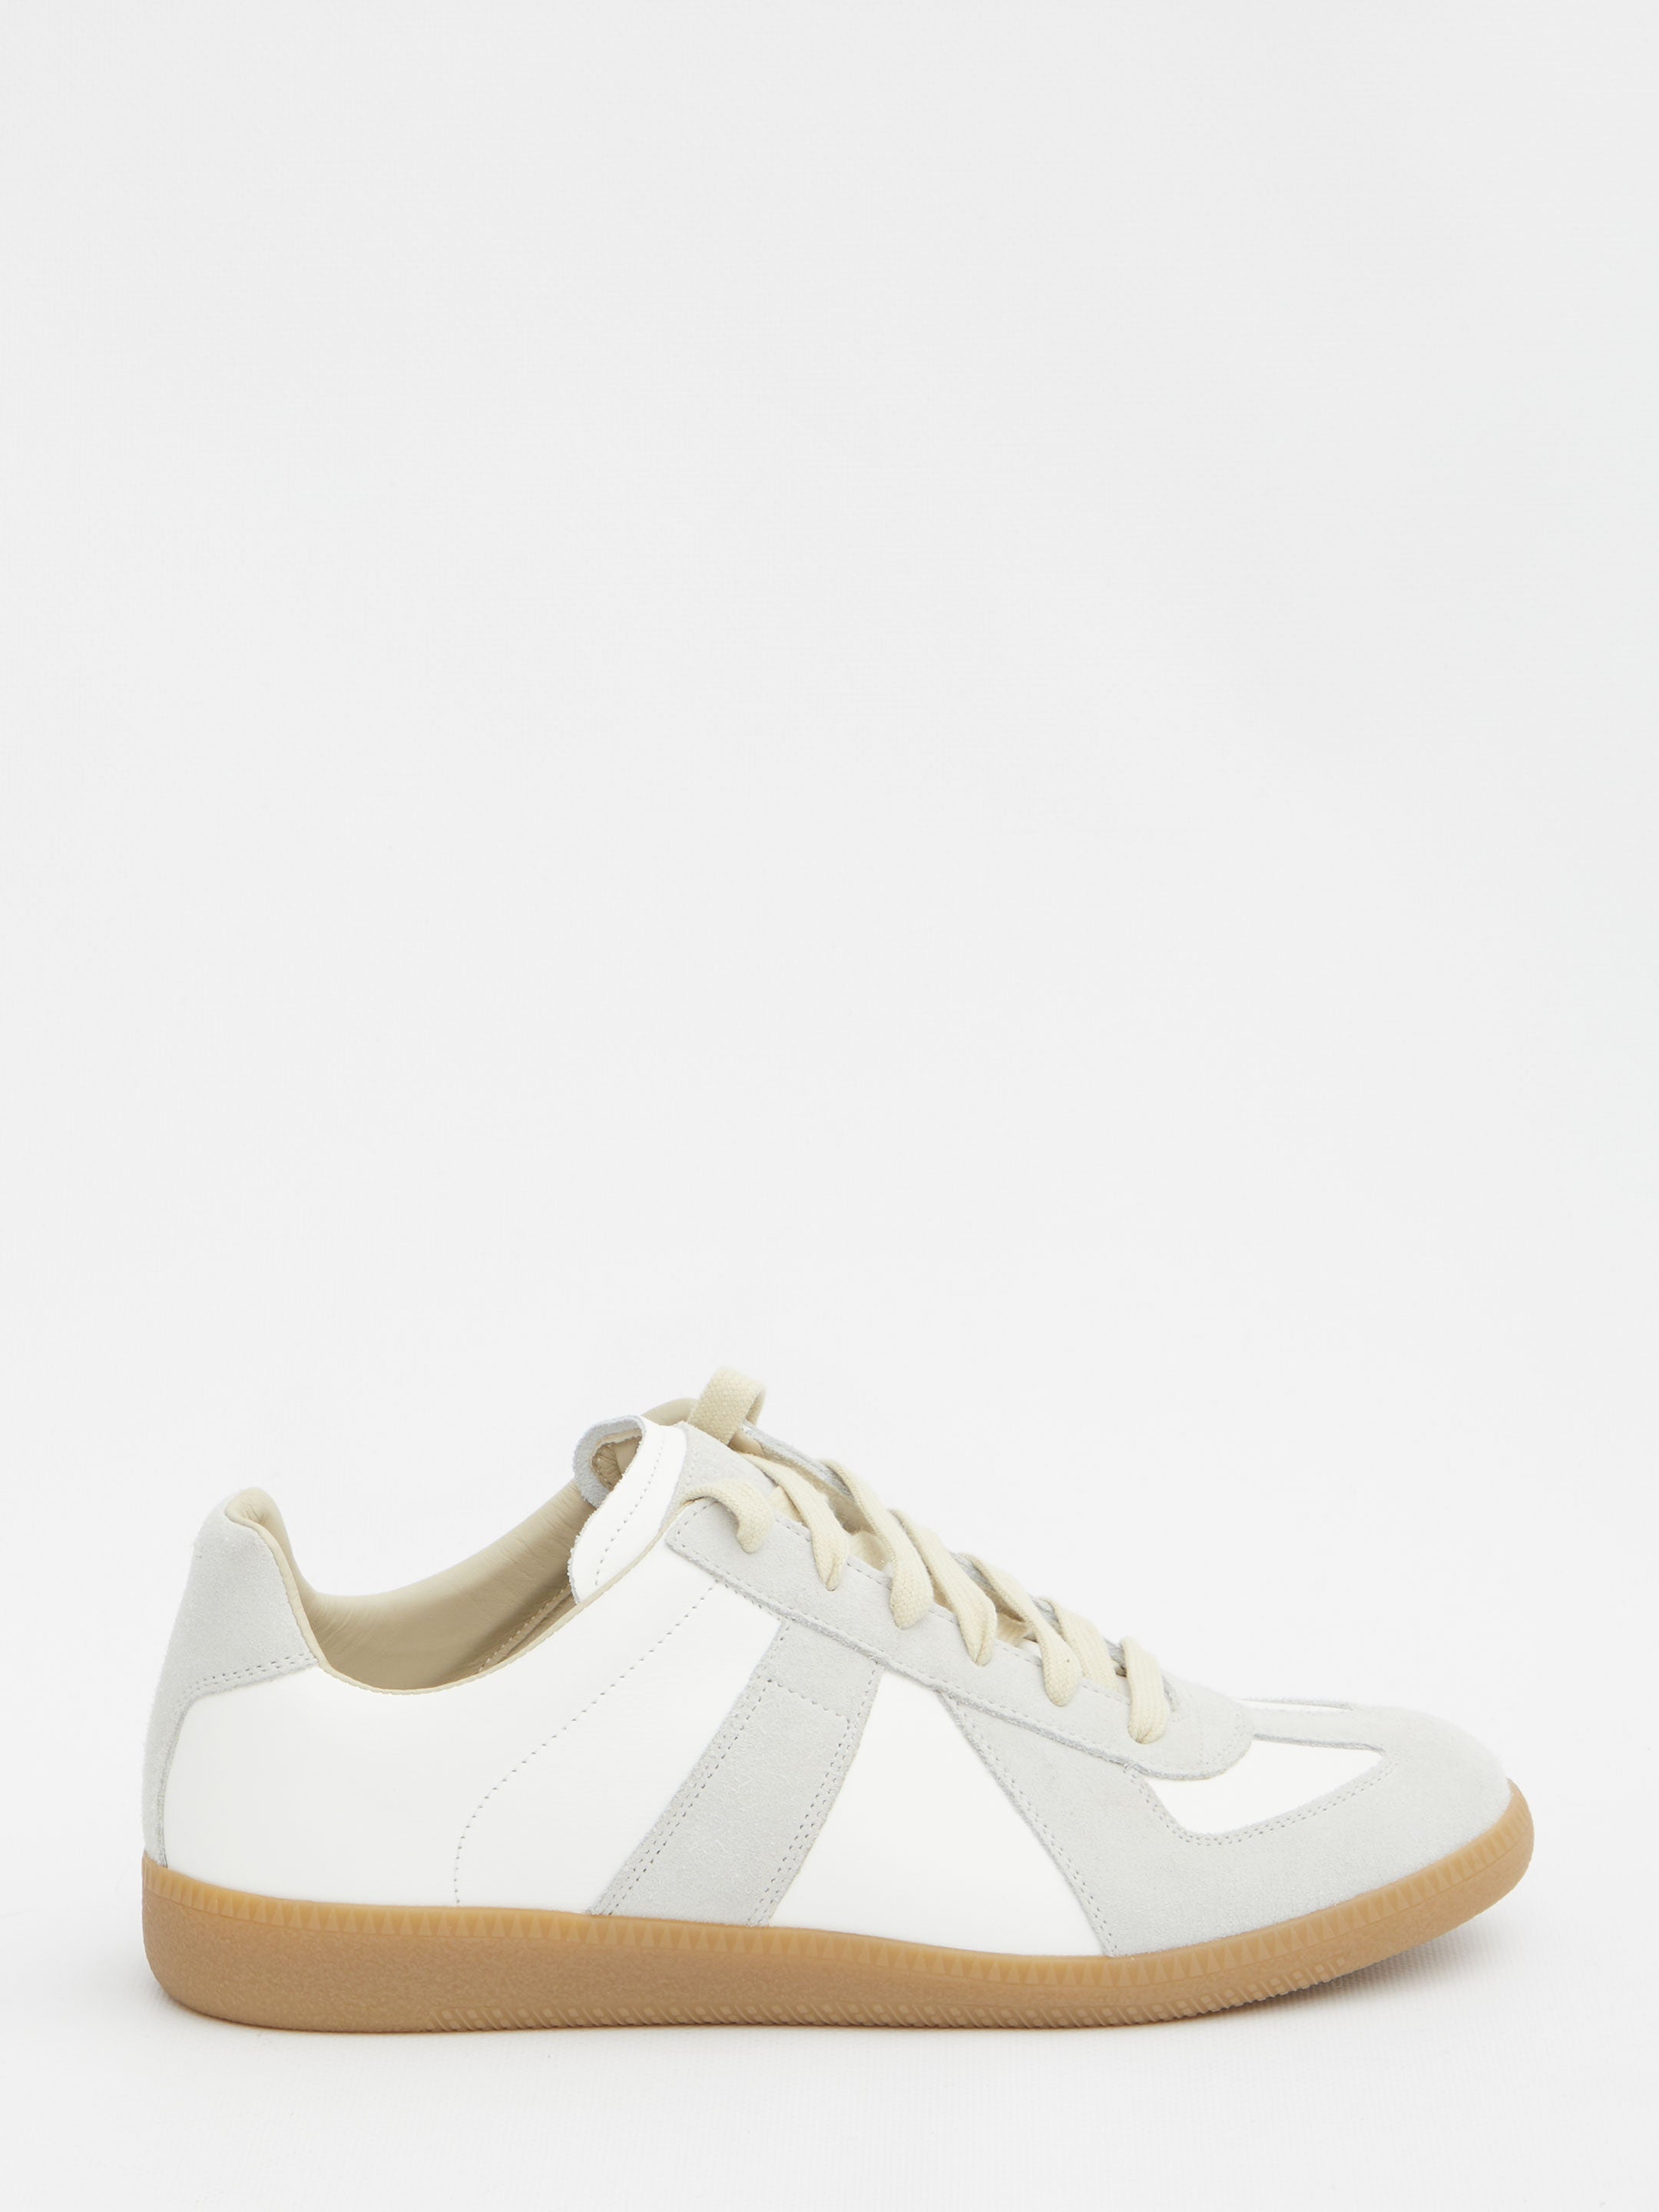 MAISON-MARGIELA-OUTLET-SALE-Replica-sneakers-Sneakers-40-WHITE-ARCHIVE-COLLECTION.jpg